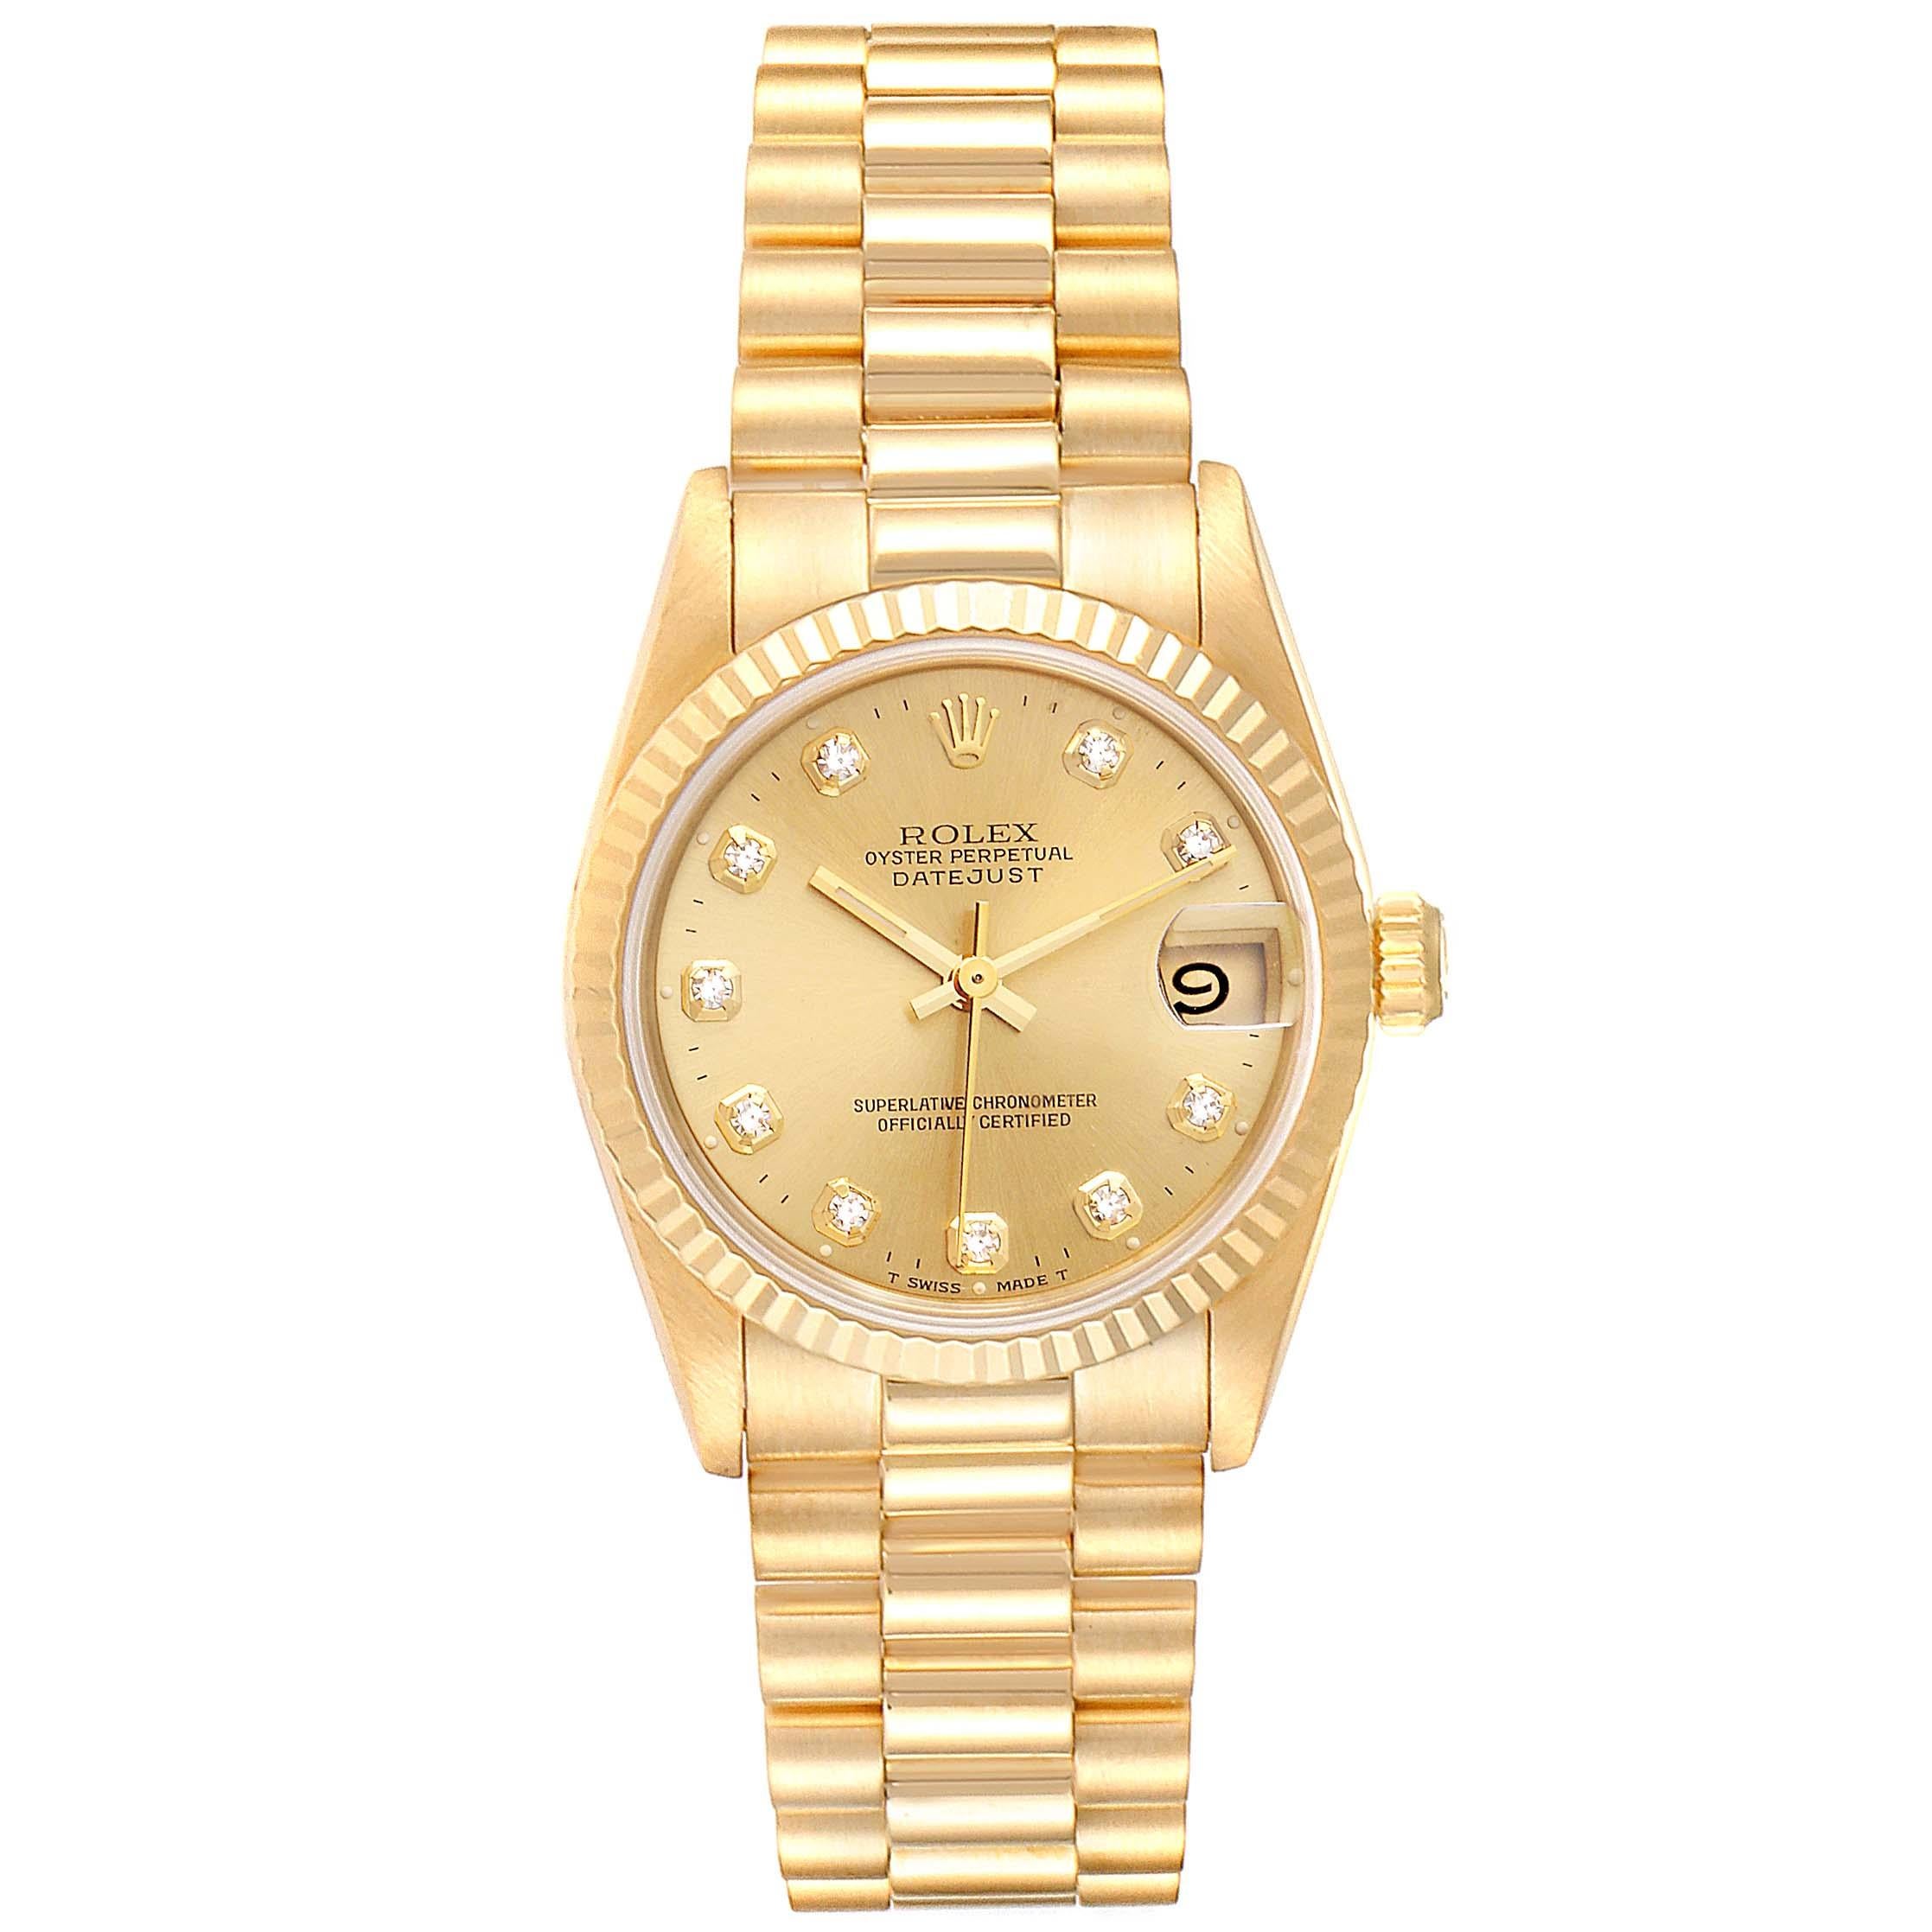 Rolex President Midsize Yellow Gold Diamond Ladies Watch 68278 Box Papers. Officially certified chronometer self-winding movement. 18k yellow gold oyster case 31.0 mm in diameter. Rolex logo on a crown. 18k yellow gold fluted bezel. Scratch